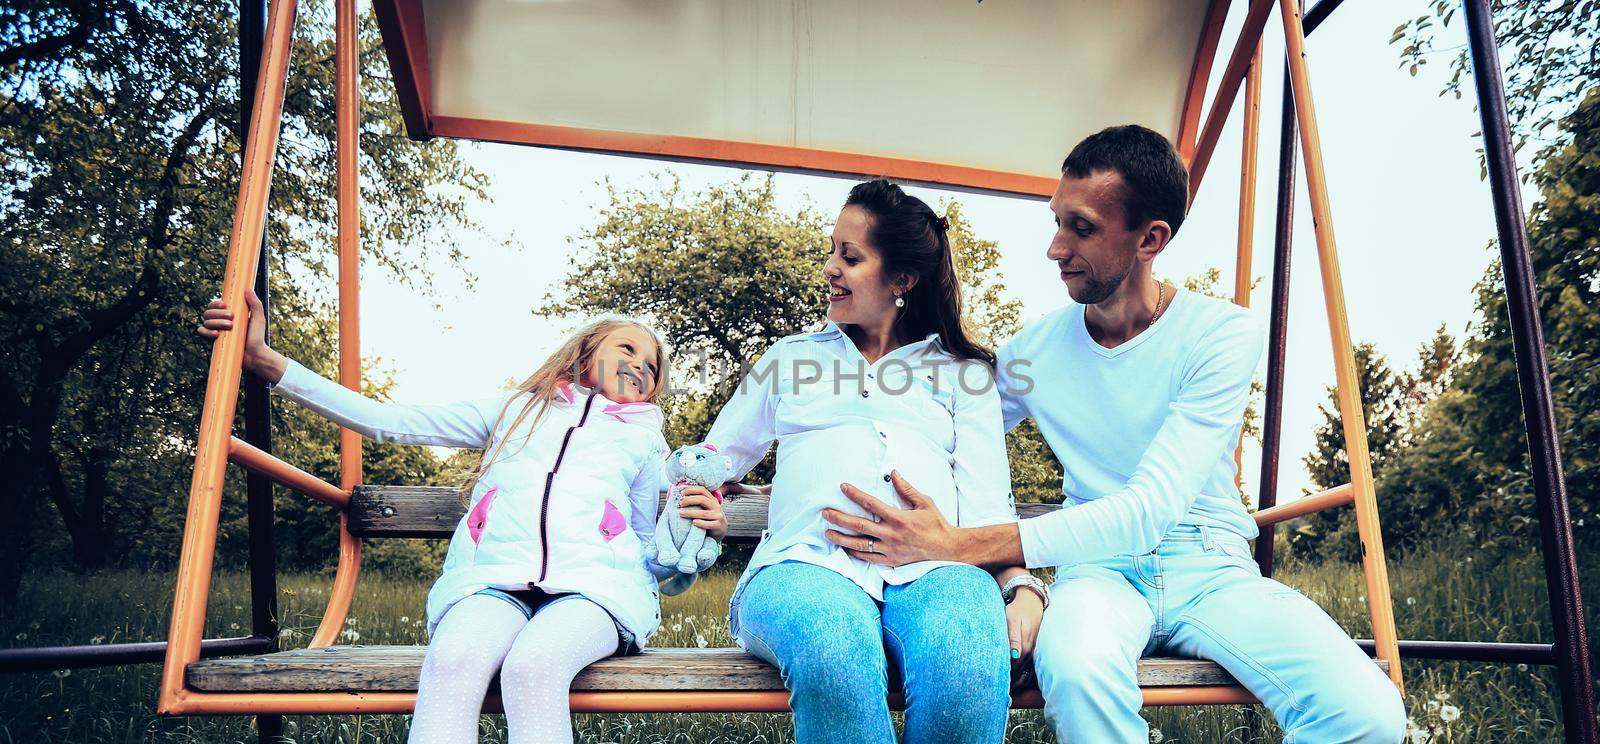 happy family on the swings in the garden on Sunday by SmartPhotoLab